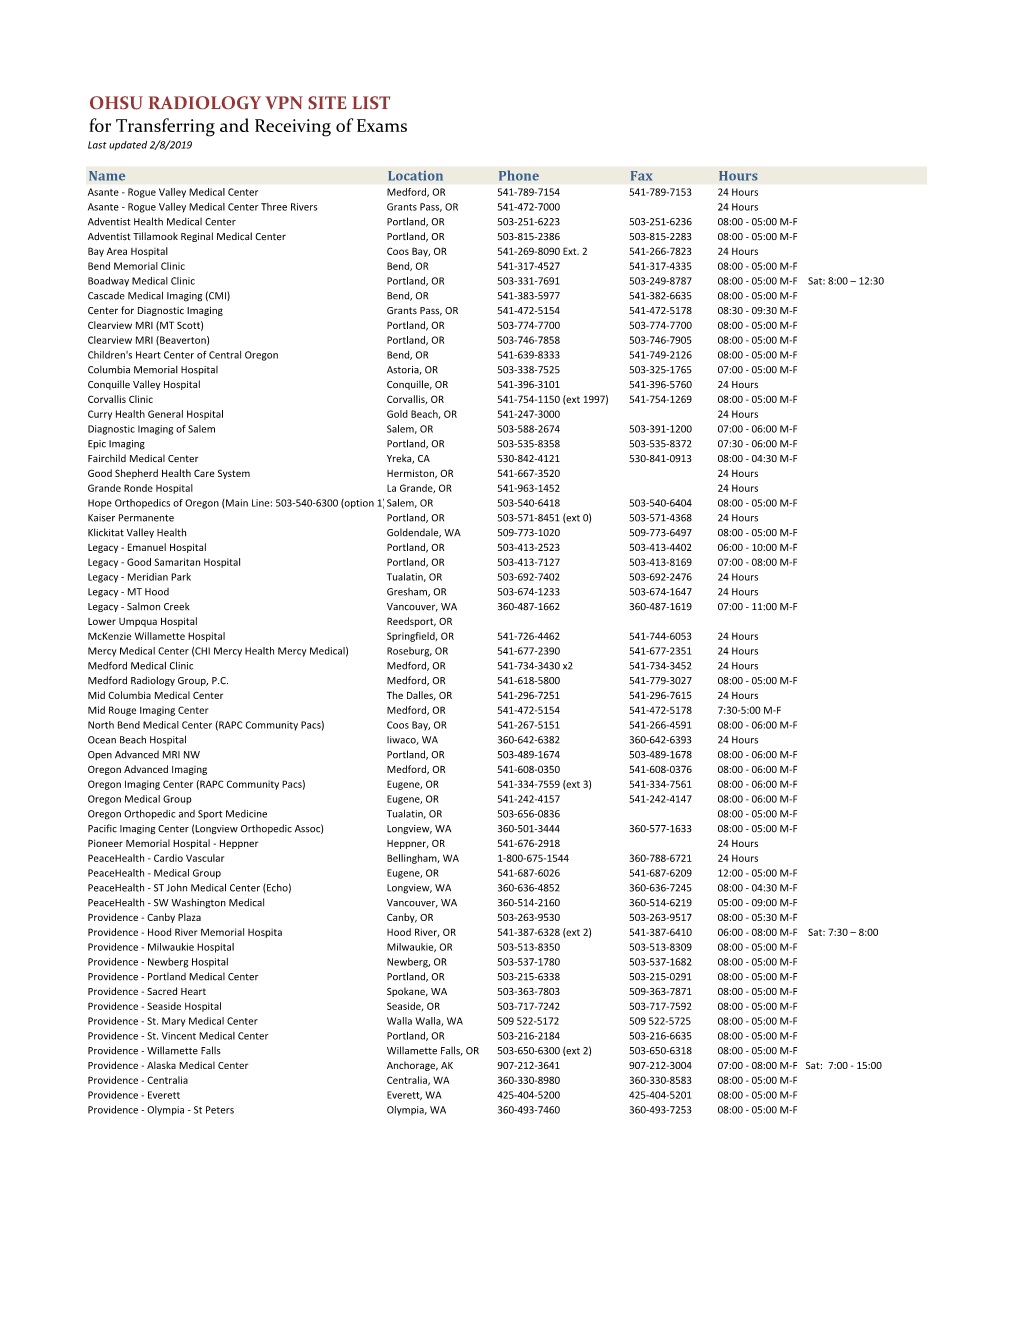 OHSU RADIOLOGY VPN SITE LIST for Transferring and Receiving of Exams Last Updated 2/8/2019